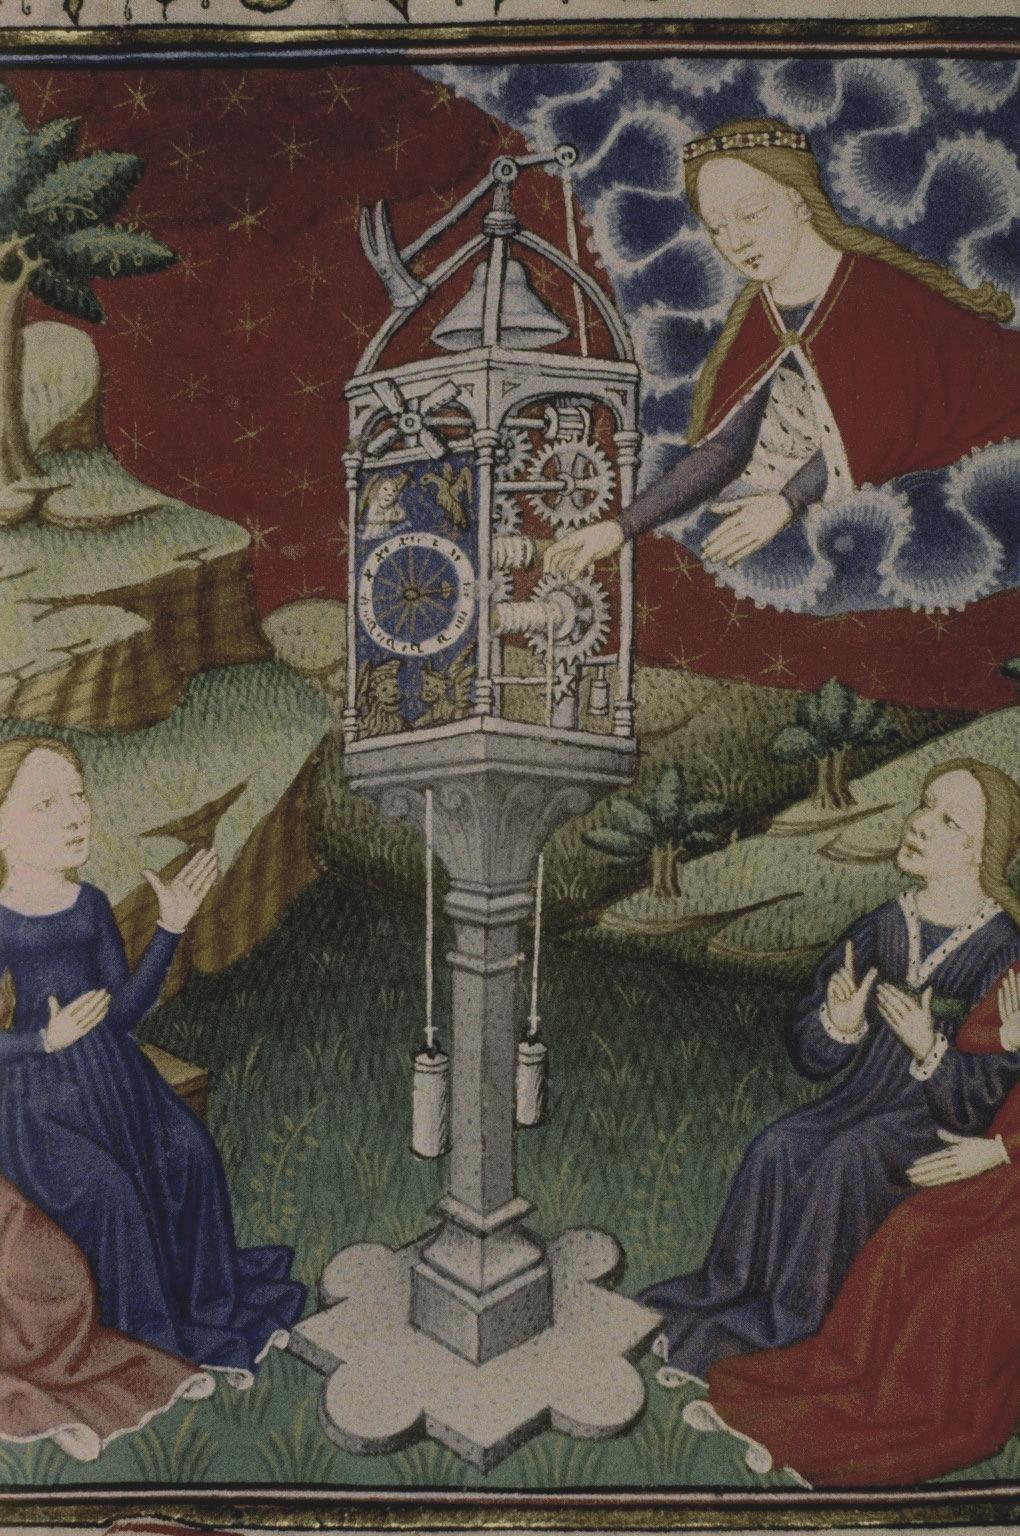 Medieval clock with wheel-work and dials in book from c. 1450